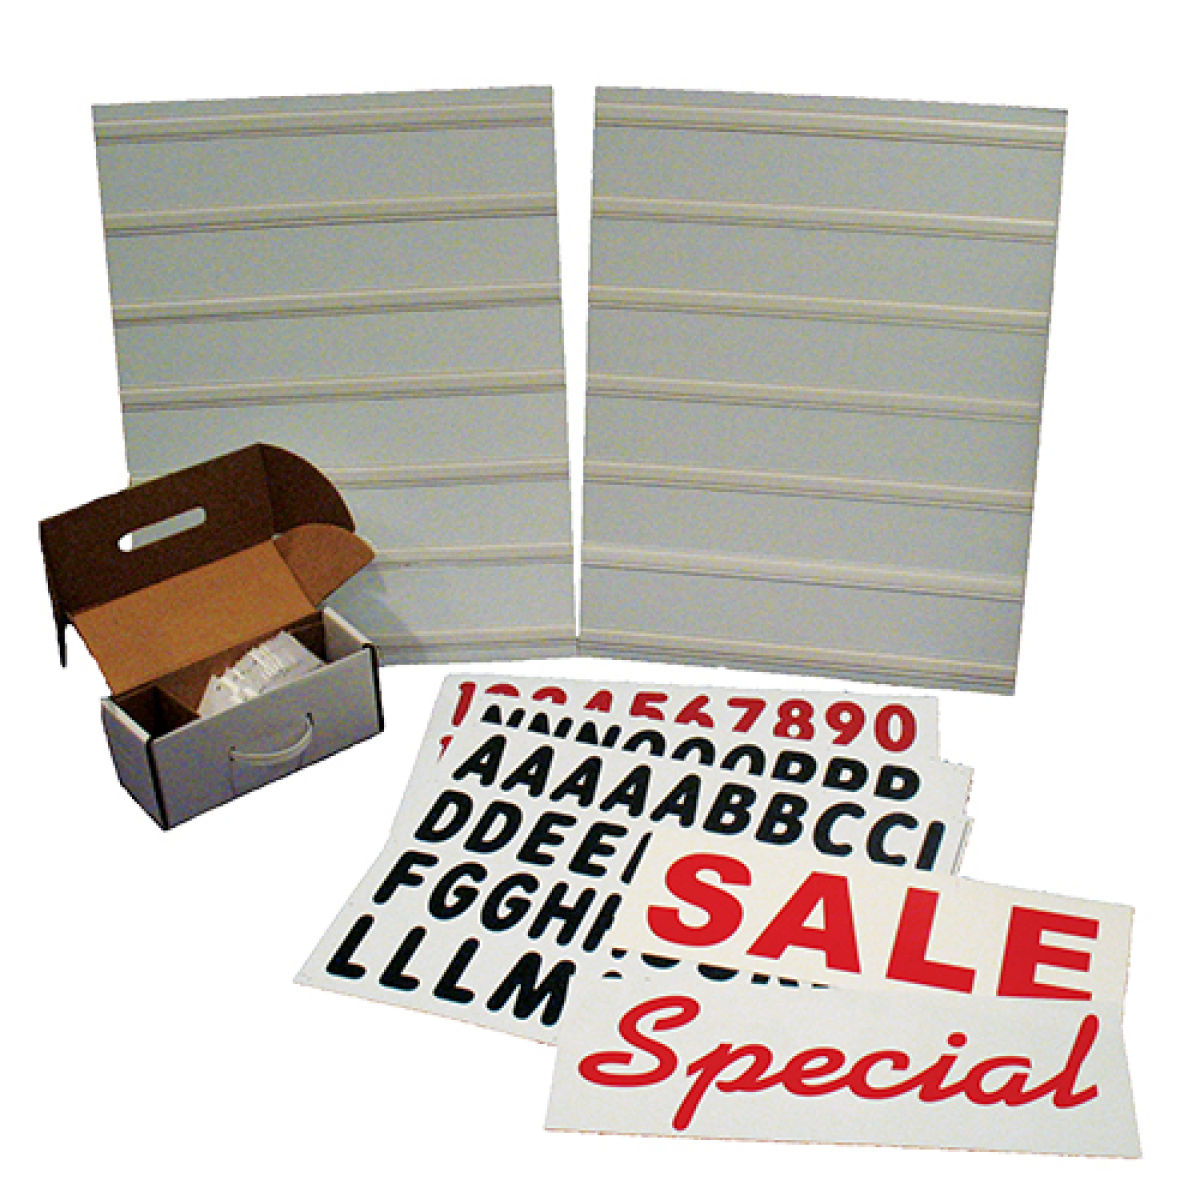 Wholesale Pricing on Plasticade Signicade® Sign Stands - Kirin Global  Supplies